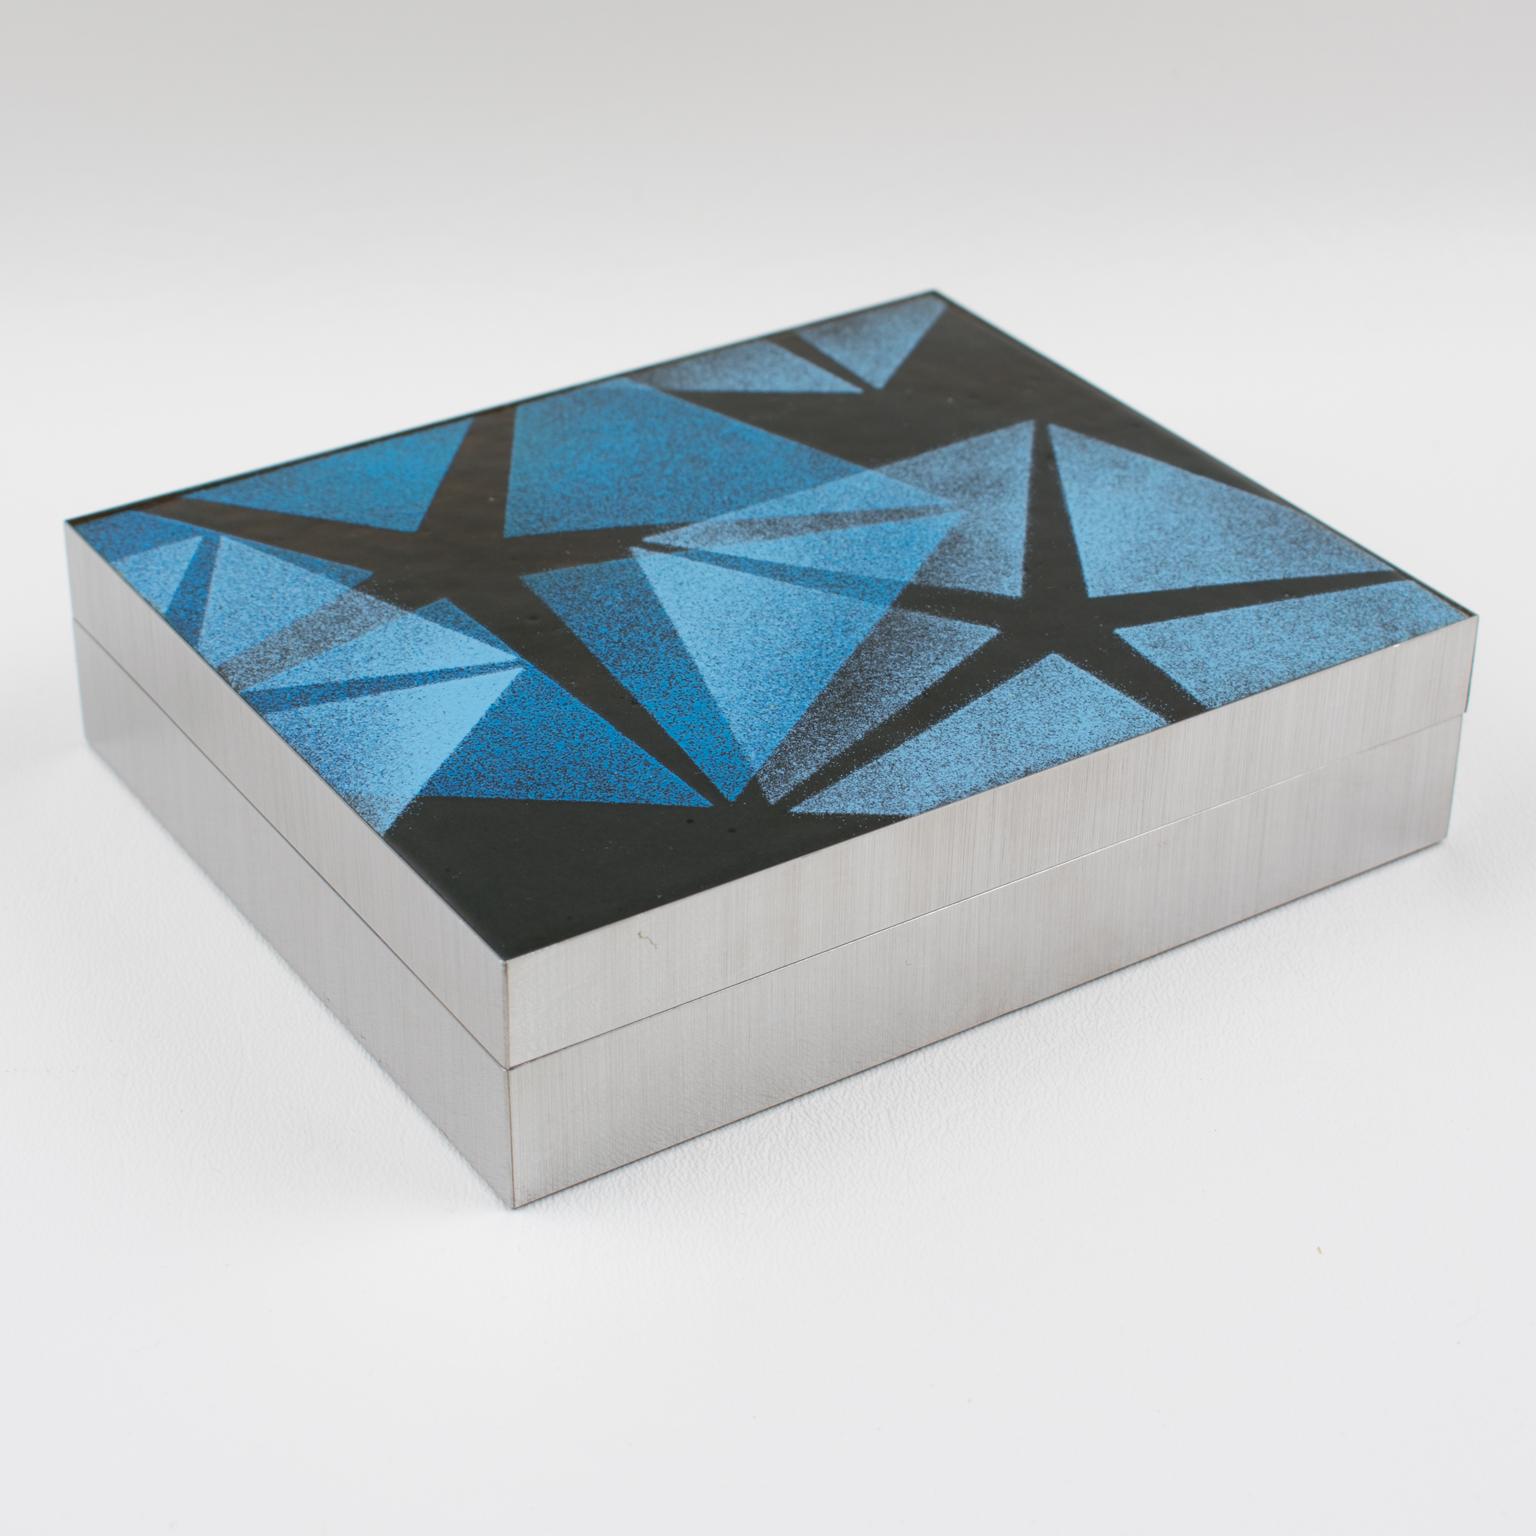 This beautiful 1970s decorative lidded box was crafted in Italy. This piece features a rectangular shape with a brushed aluminum base and enamel-on-copper lid with a geometric stylized star design. The piece boasts cobalt blue, black, and white